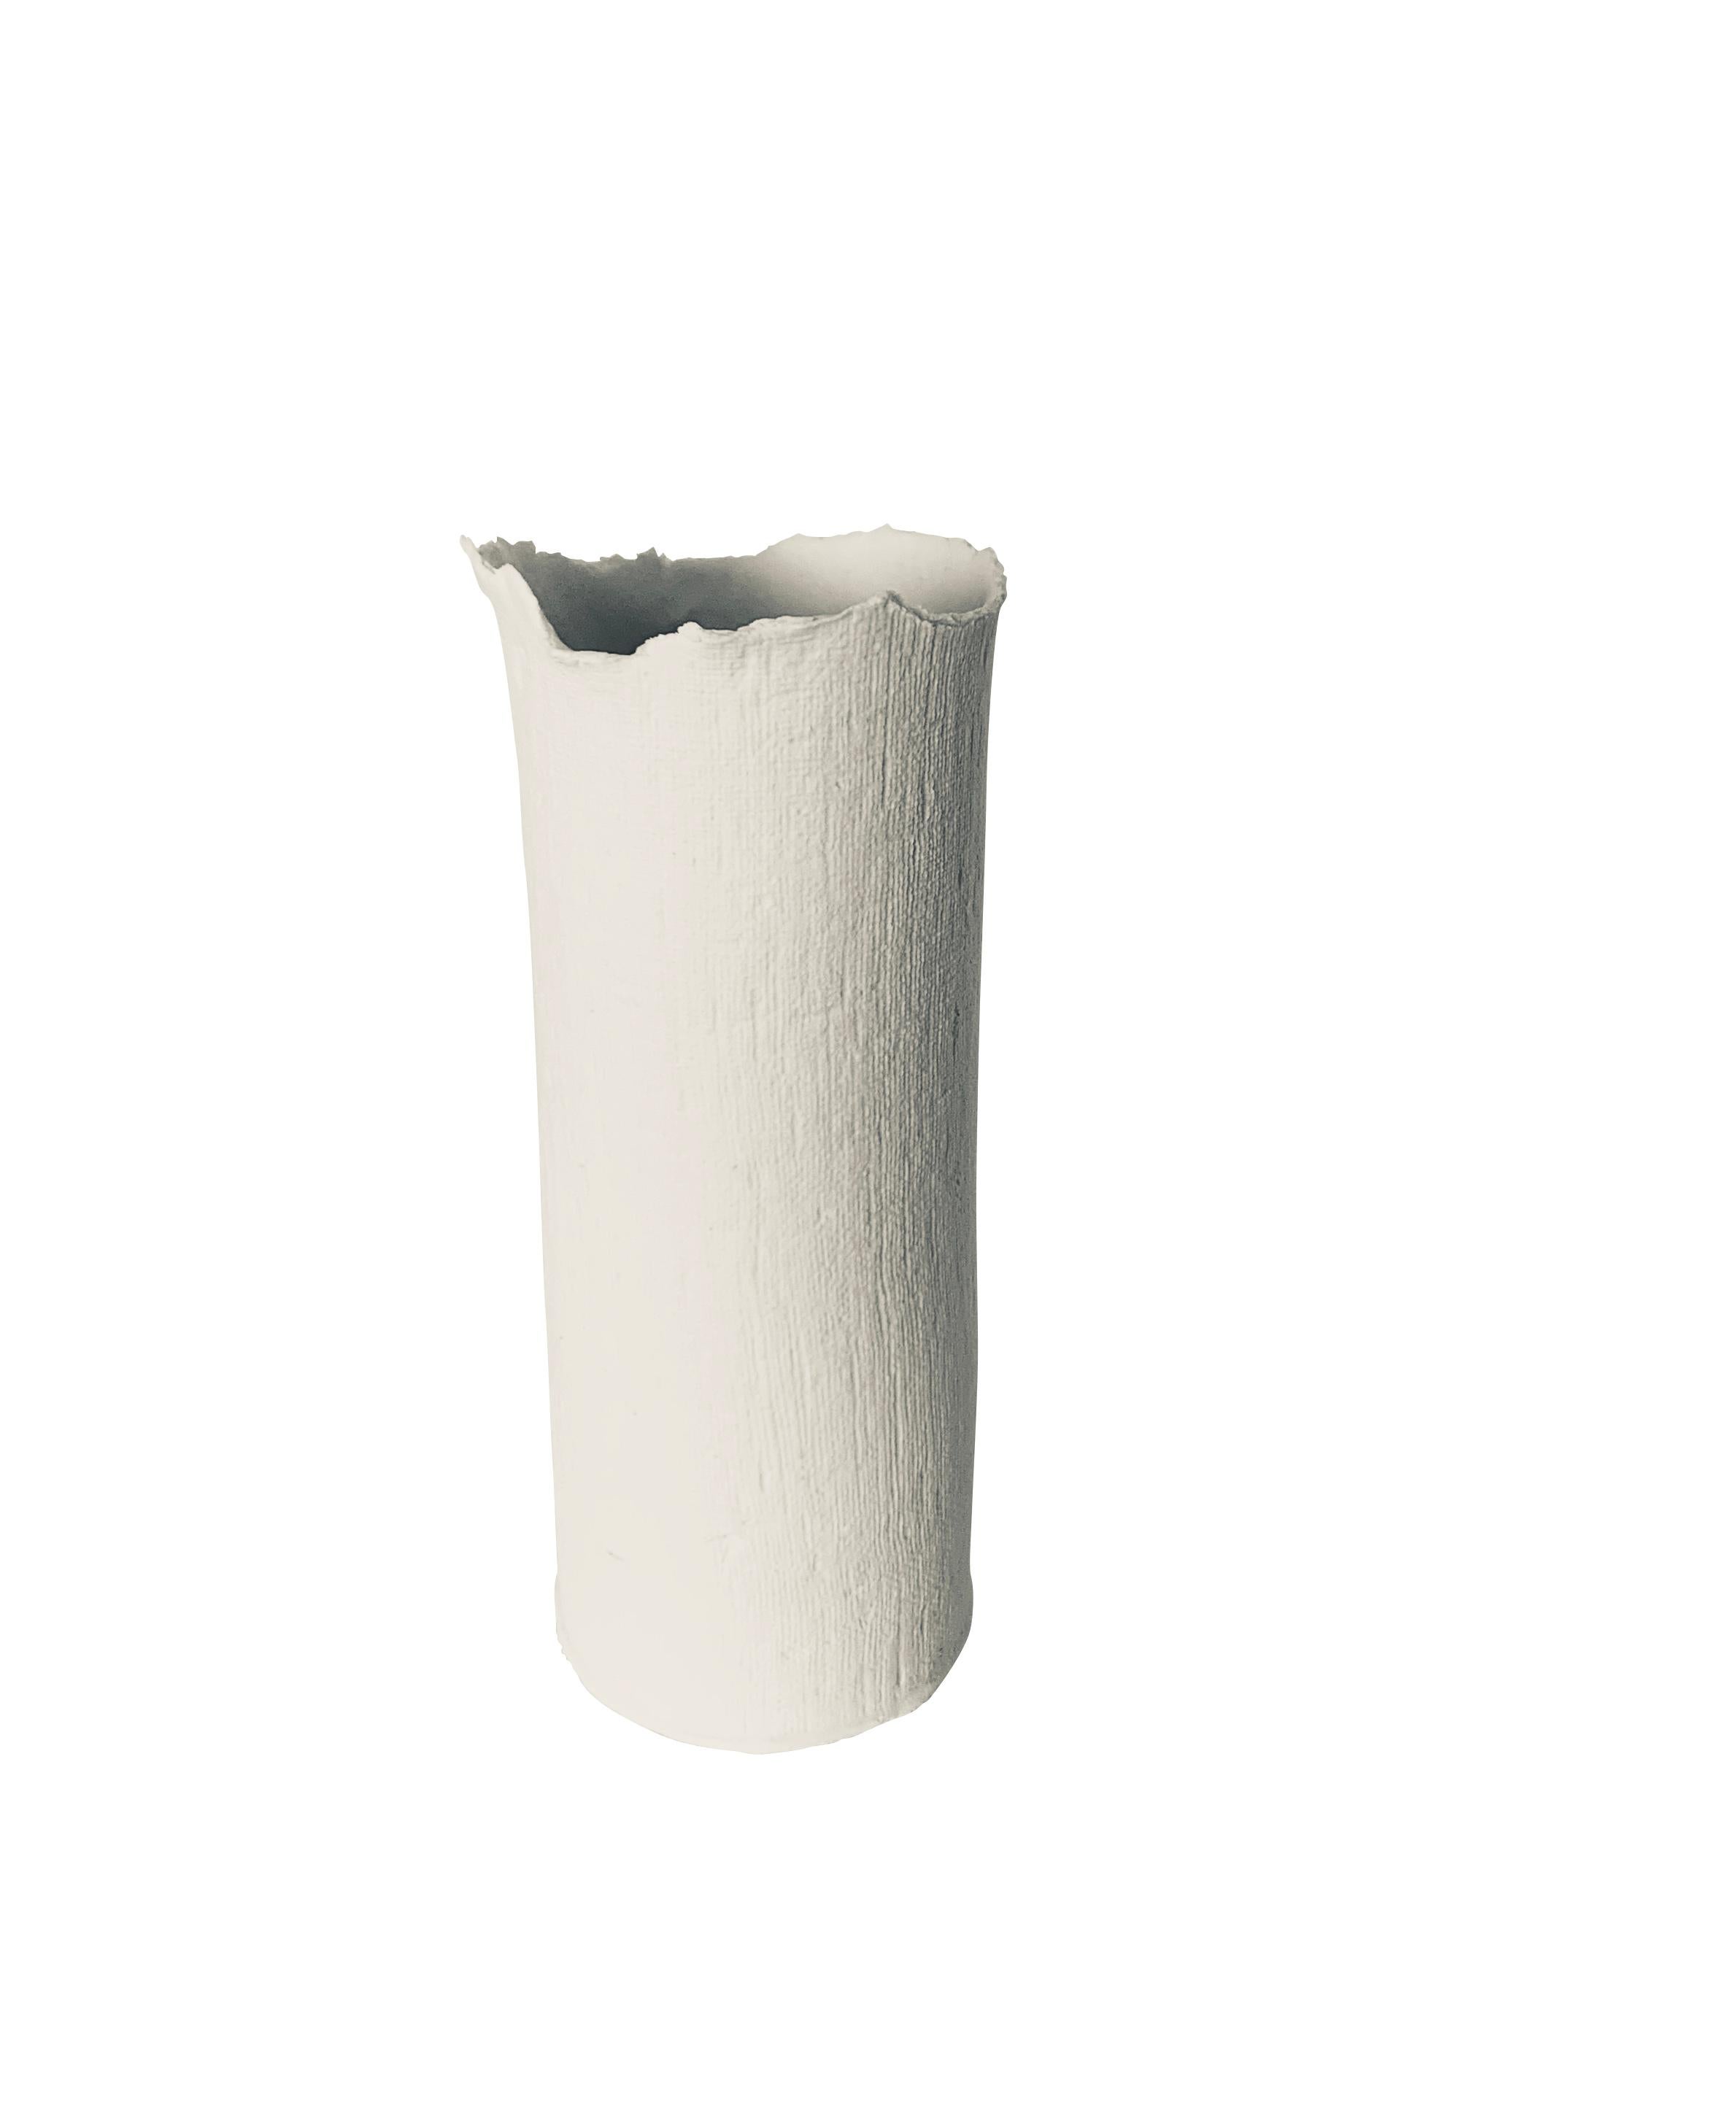 Contemporary French handmade white fine ceramic tall cylinder shaped vase is a one of a kind piece.
The vase is fine ceramic with a textured surface that looks like linen.
The mouth of the vase has an unfinished rough edge detail.
A collection of